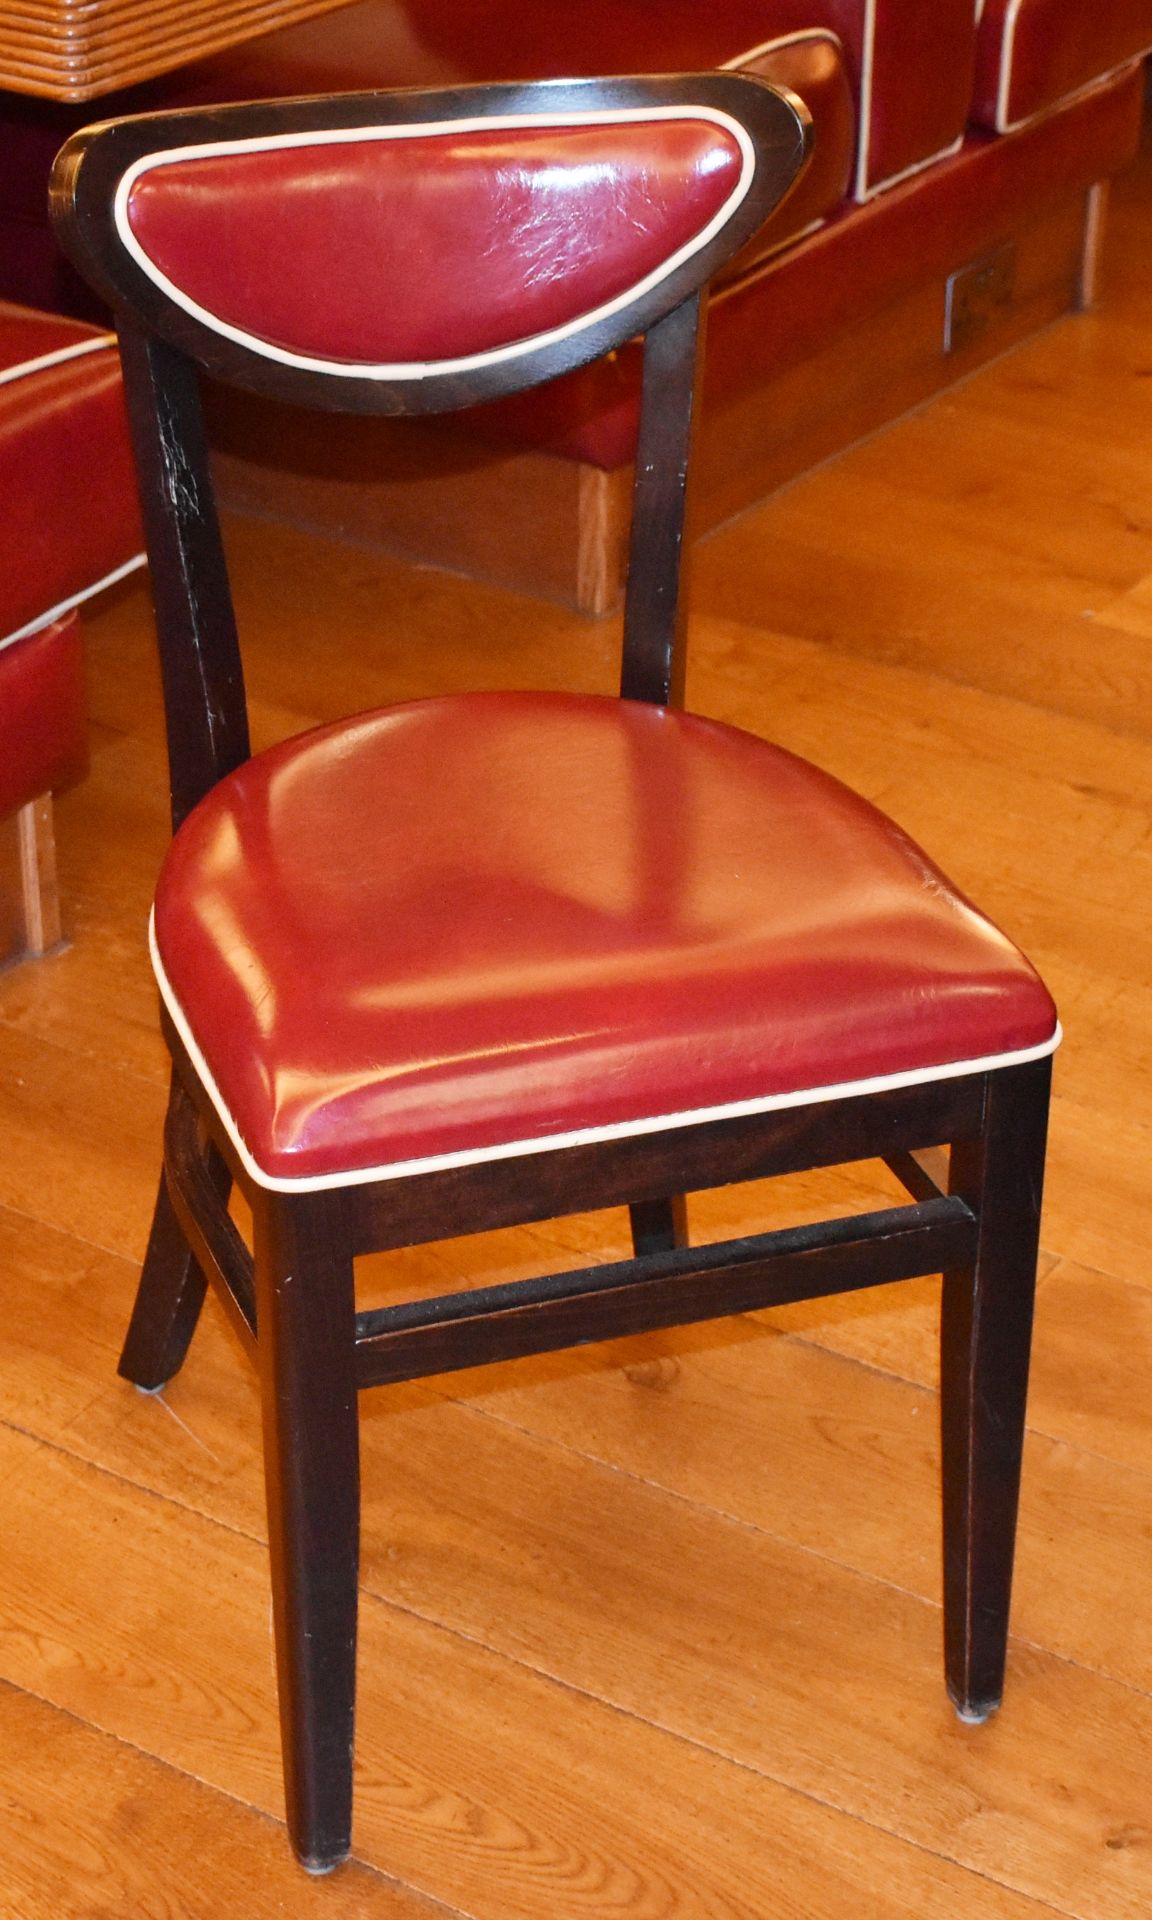 4 x American Diner Restaurant Chairs - Features Red Faux Leather Upholstery and White Piping -